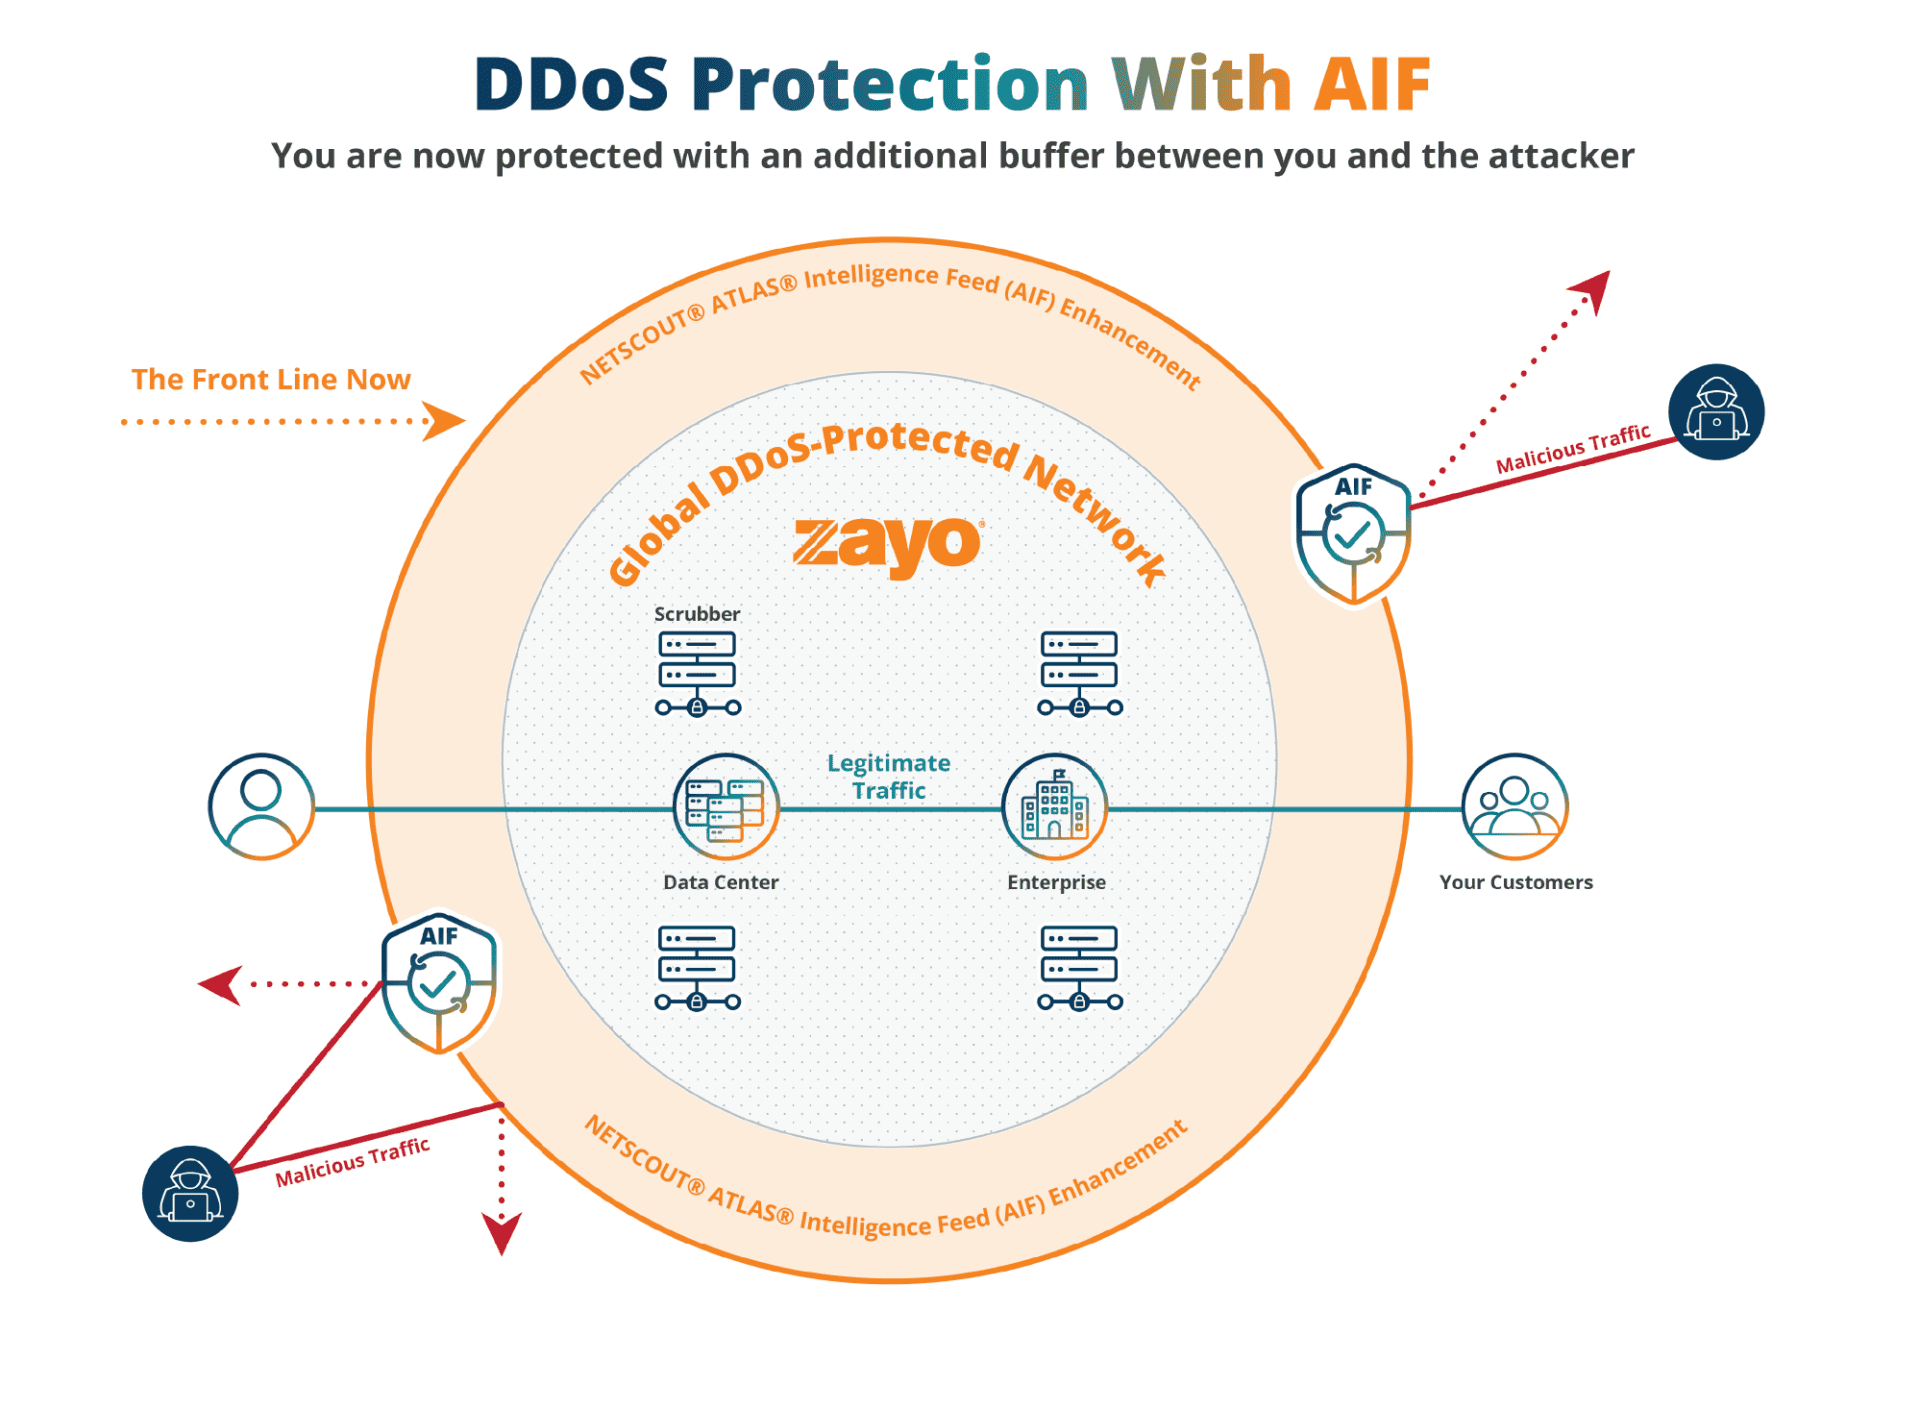 ddos protection aif high res@2x